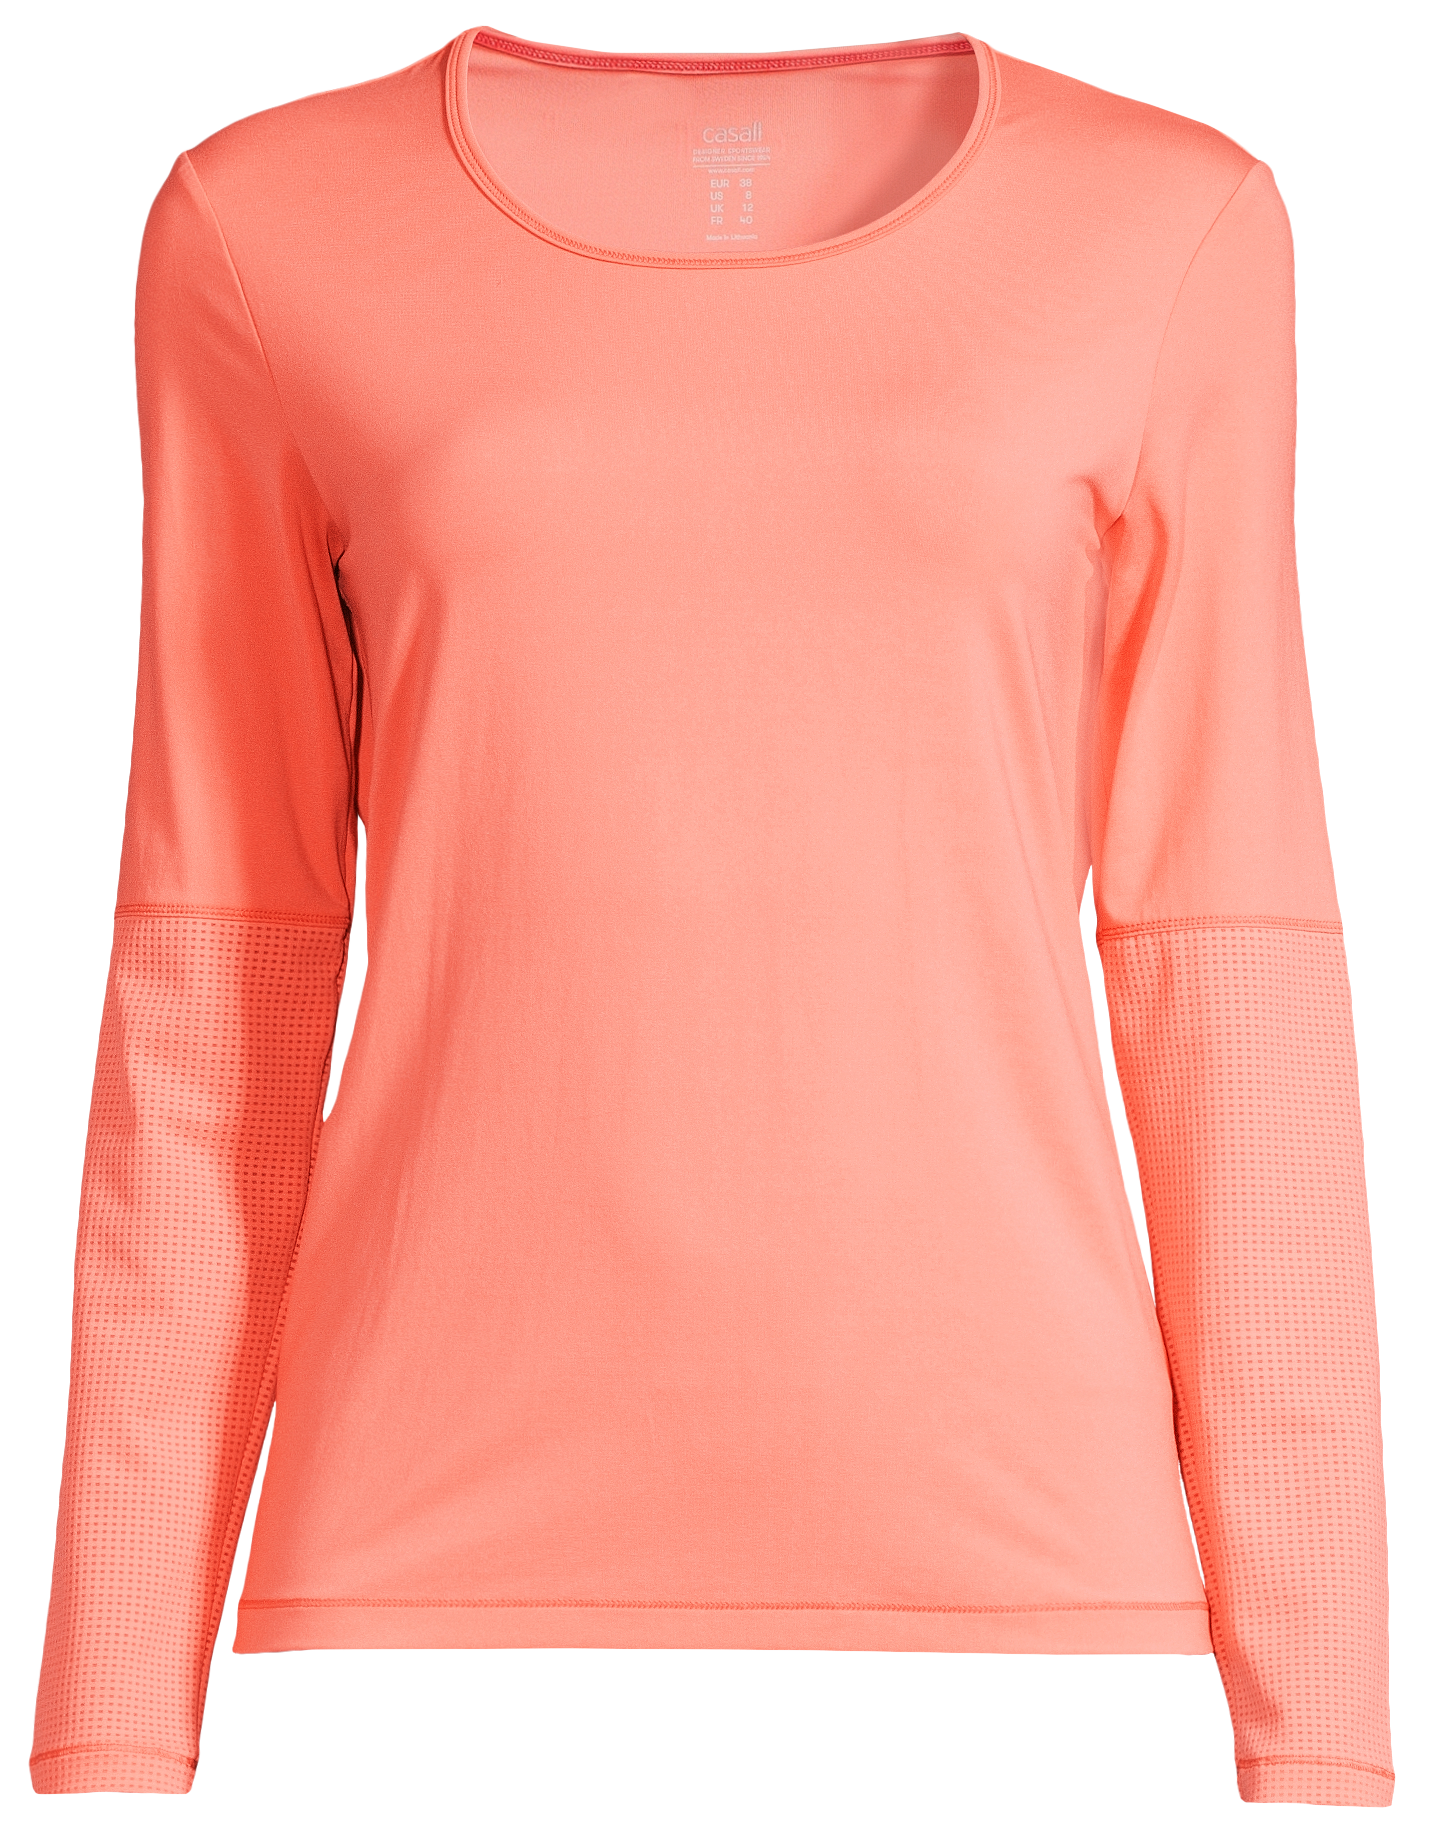 CASALL Women’s Iconic Long Sleeve Pale Coral